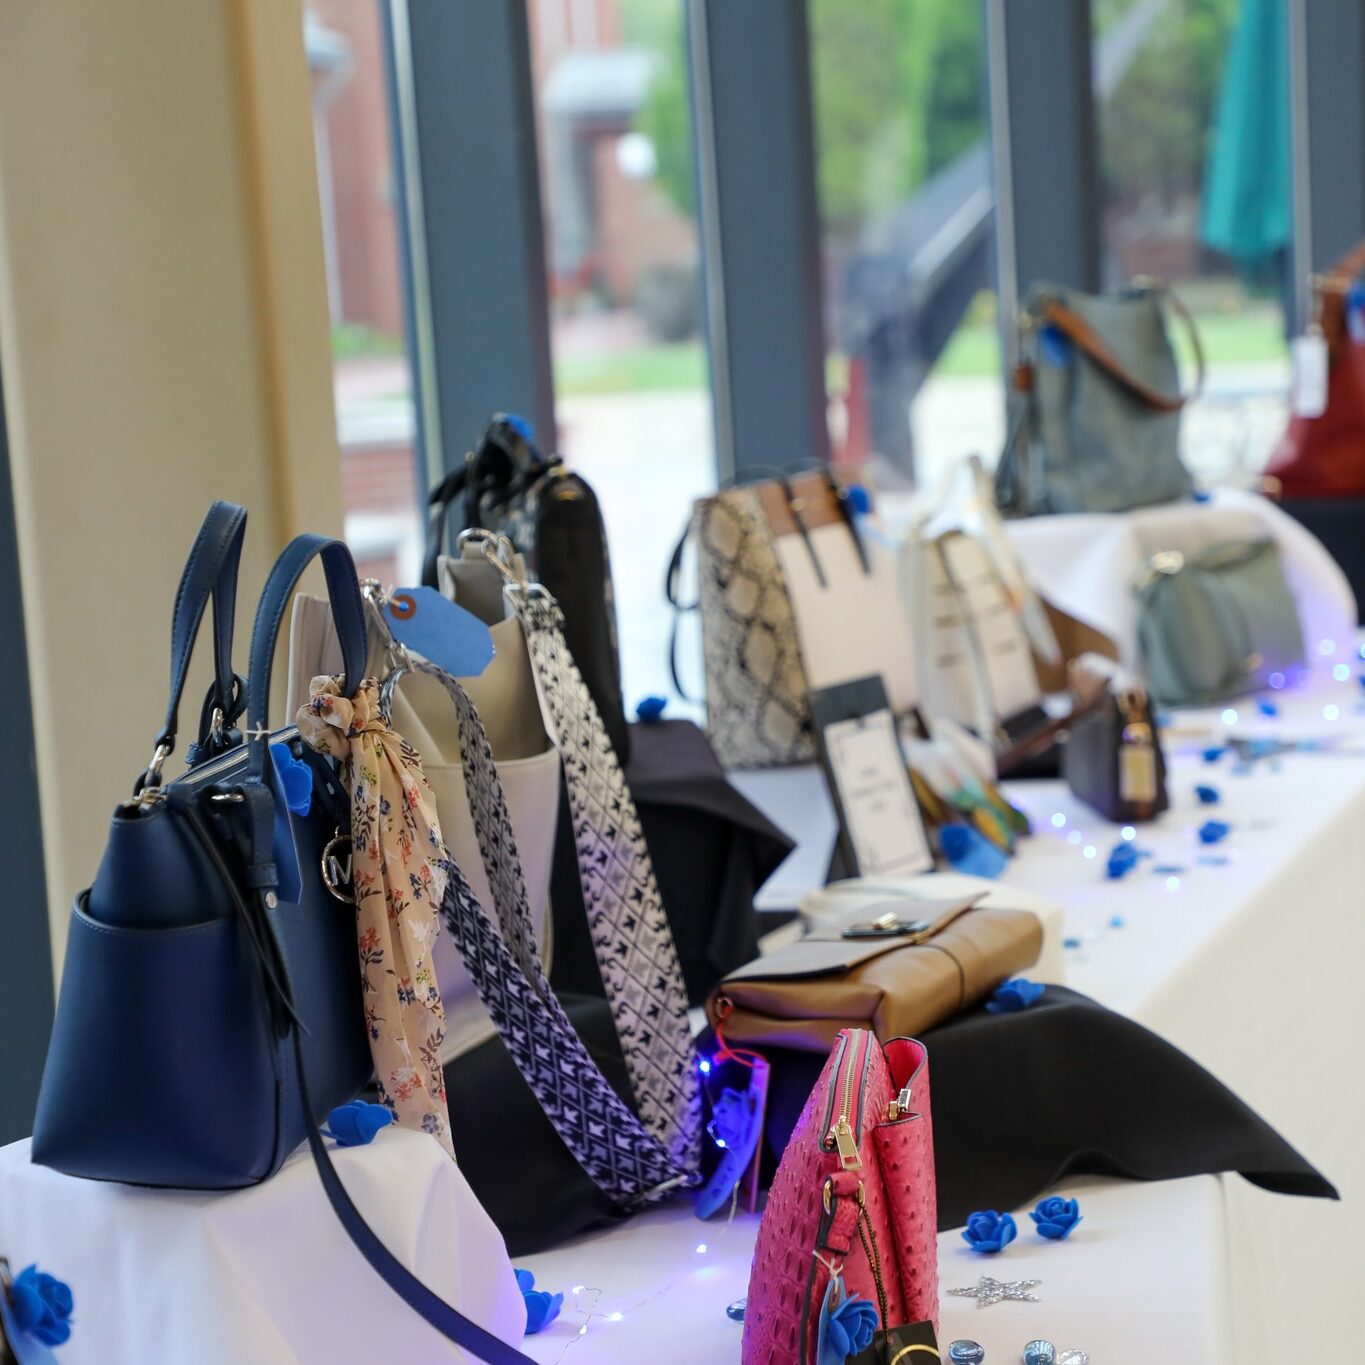 Purses are lined up for the Power of the Purse fundraiser